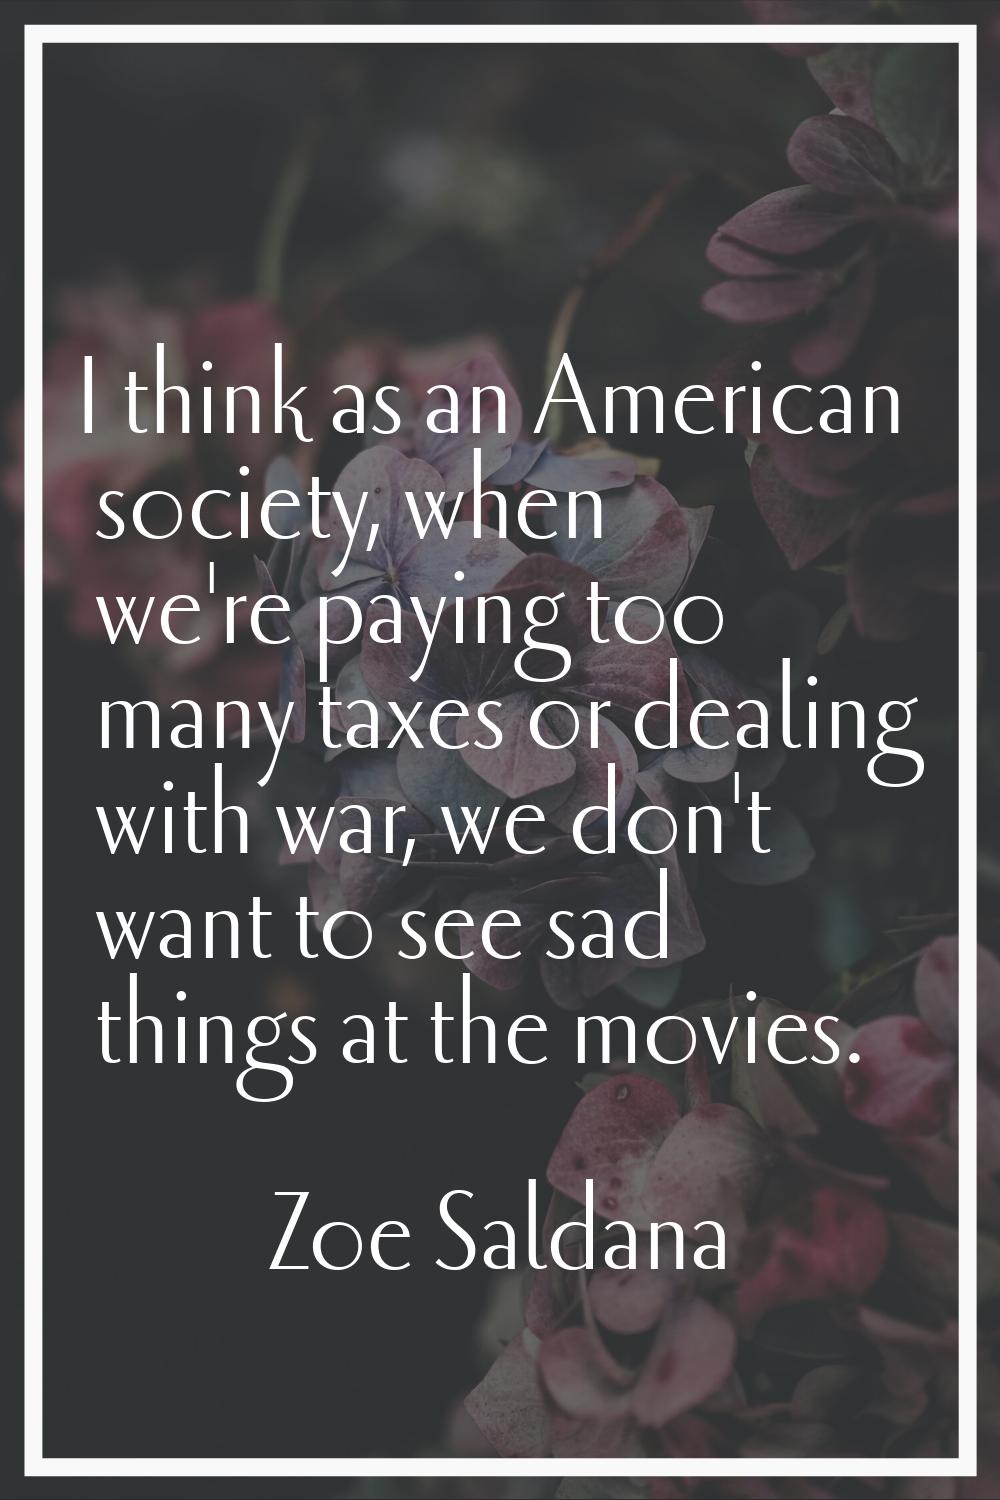 I think as an American society, when we're paying too many taxes or dealing with war, we don't want